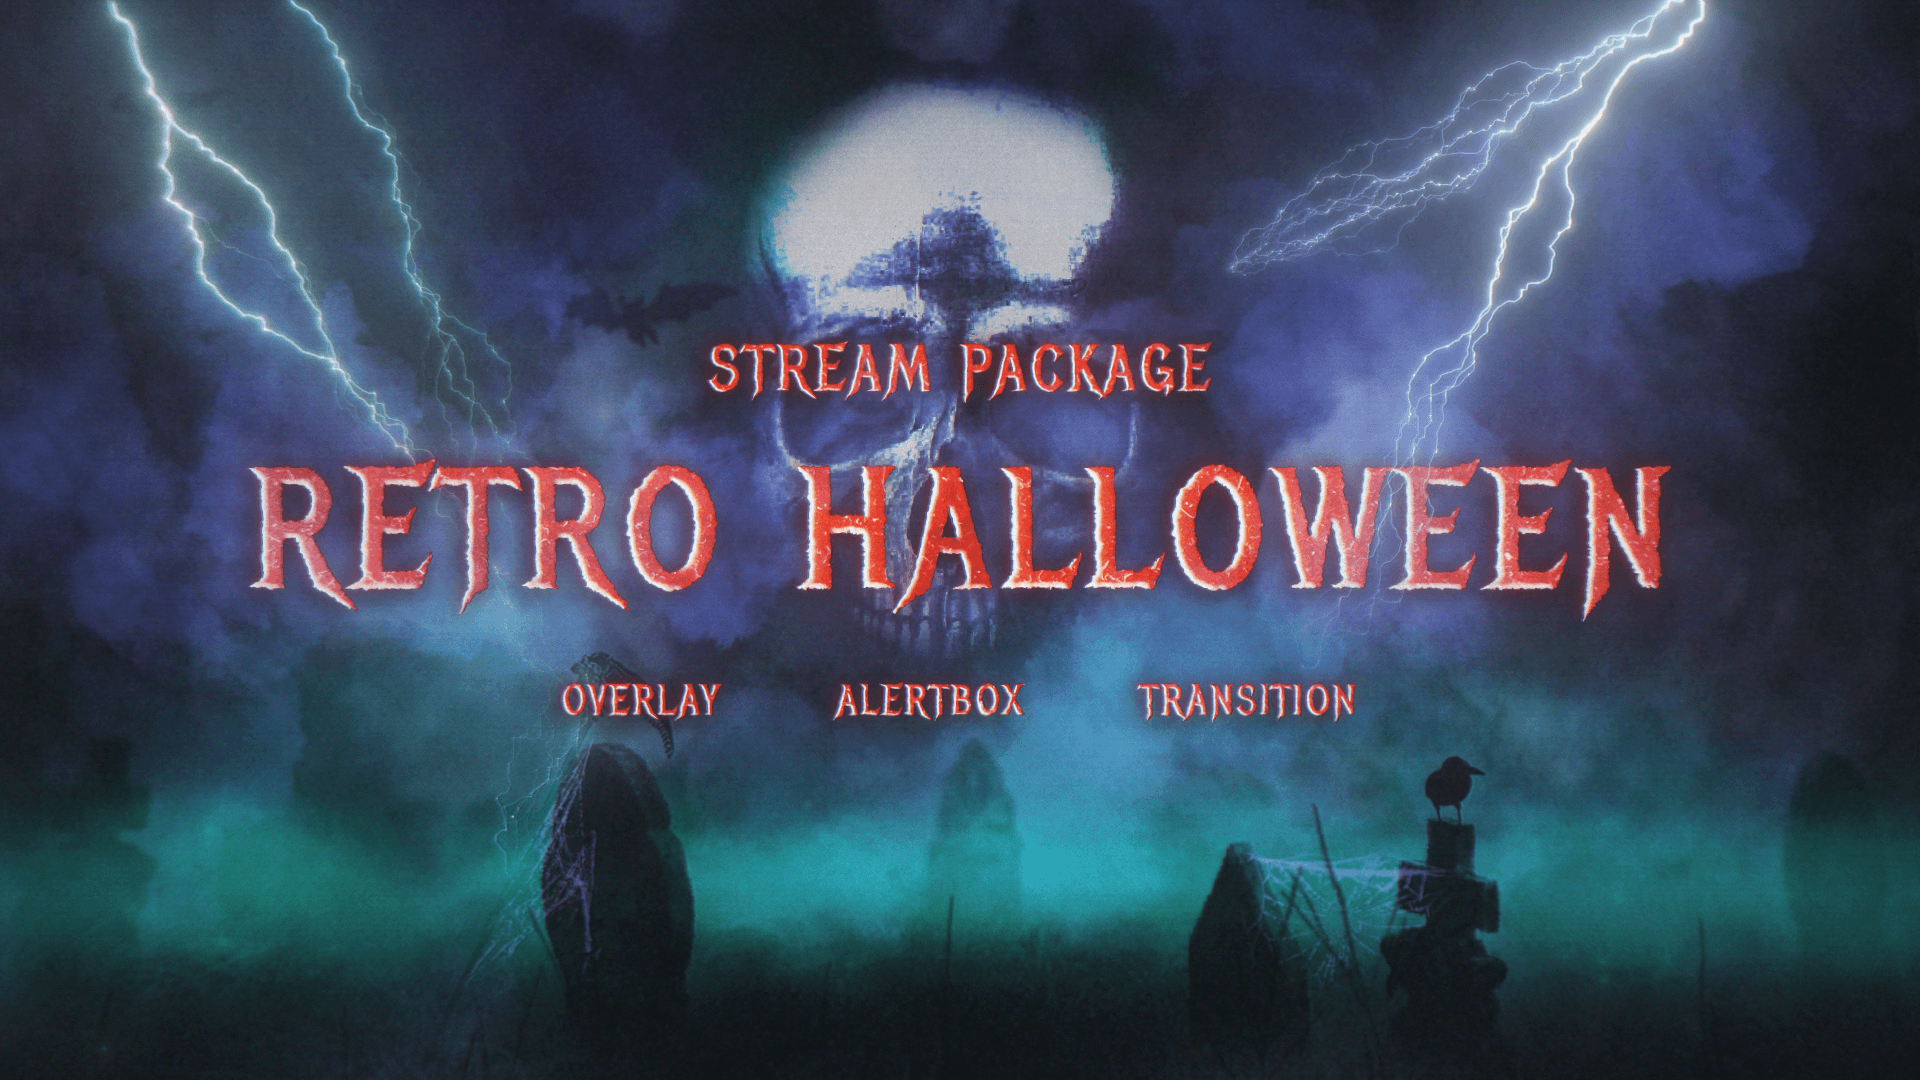 Retro Halloween - Twitch Stream Package, Overlays and Alerts for OBS